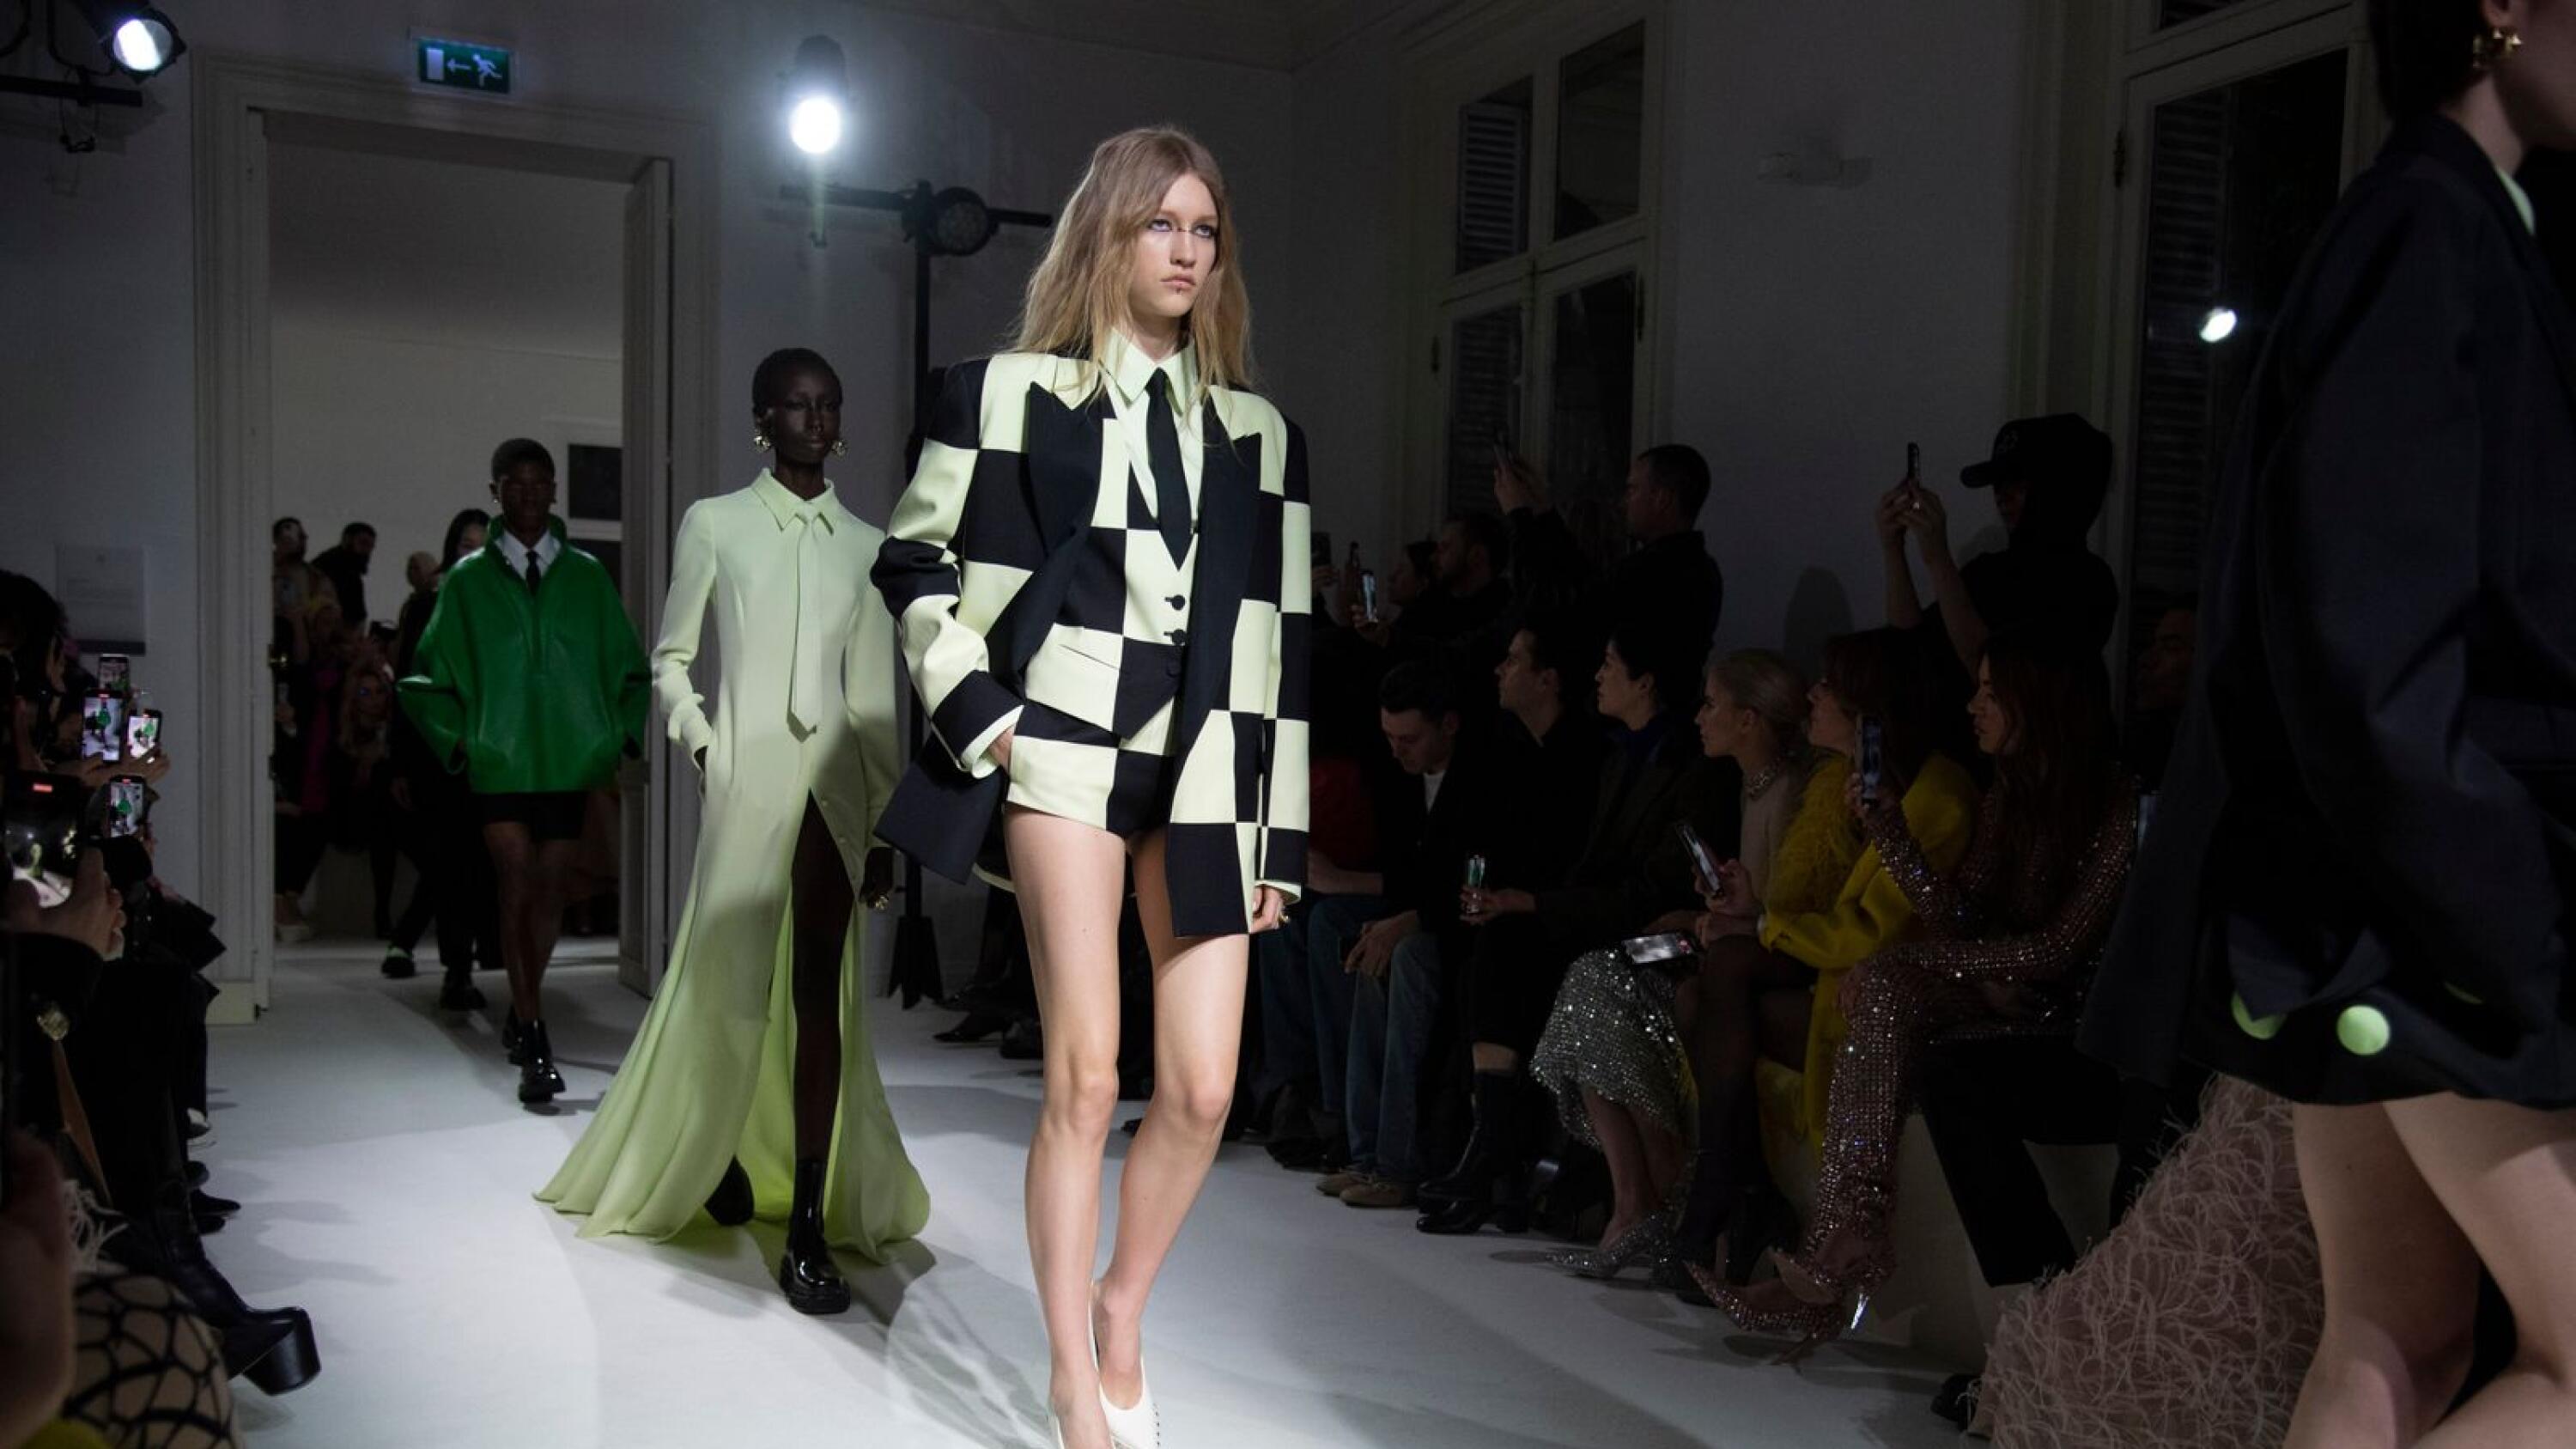 French Luxury Group Kering to Buy 30% Stake in Valentino for 1.7